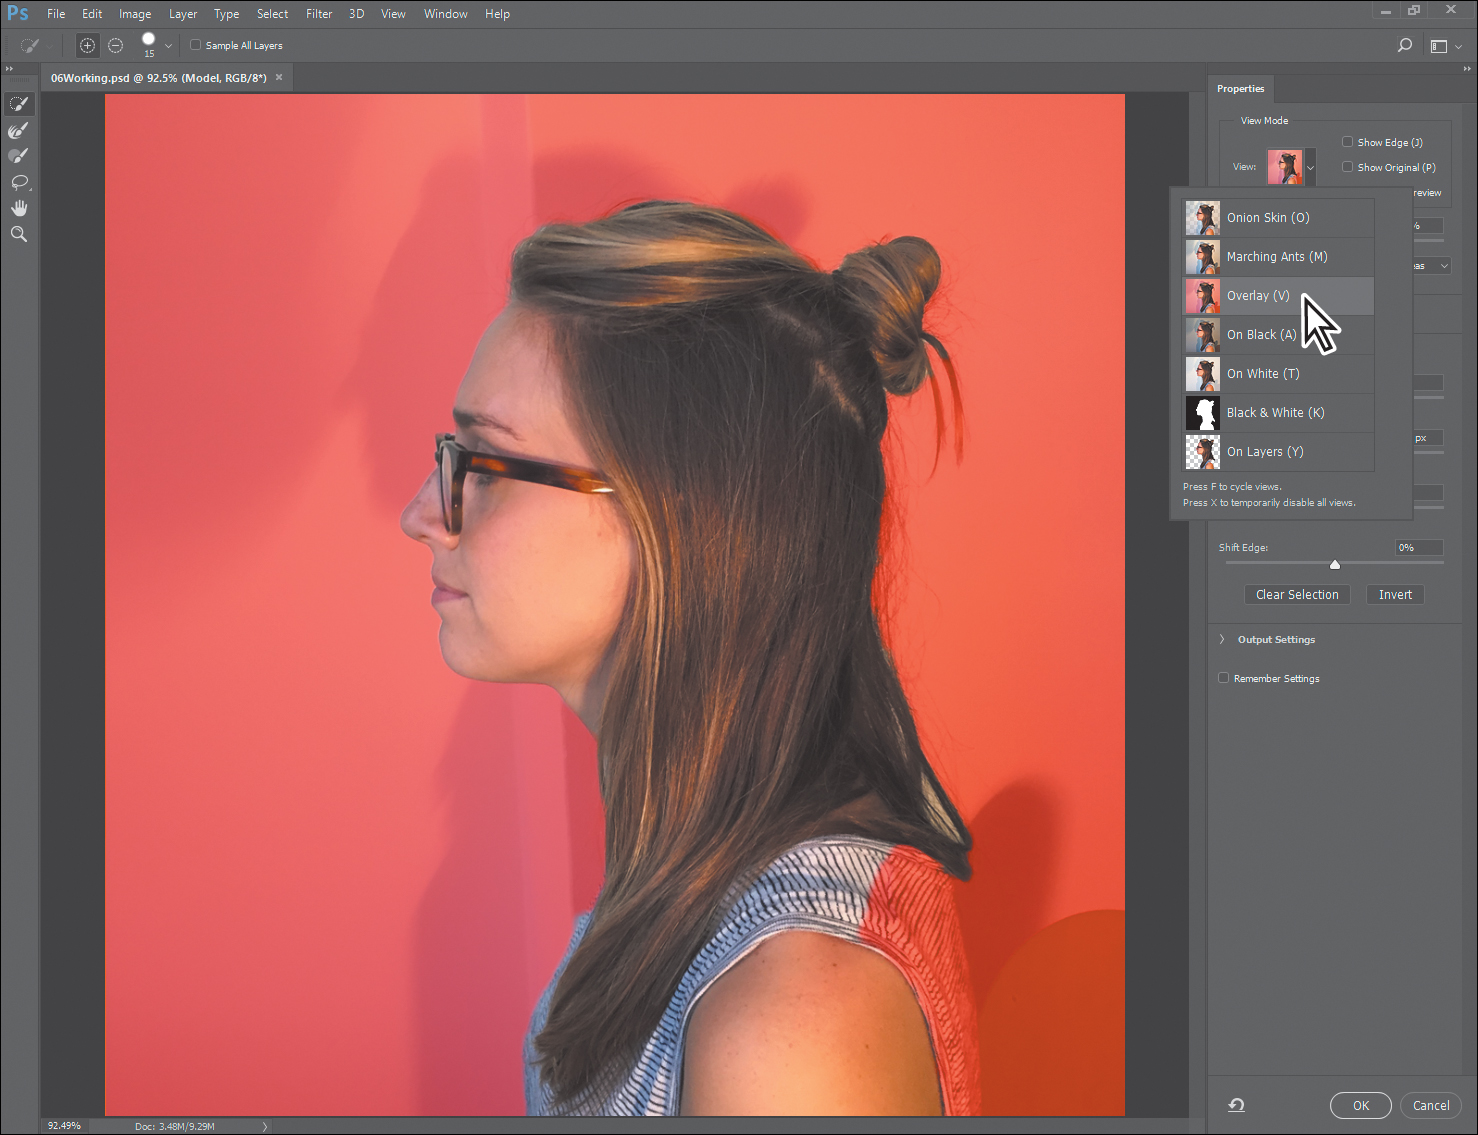 A screenshot shows an image of a girl with a semitransparent red color.